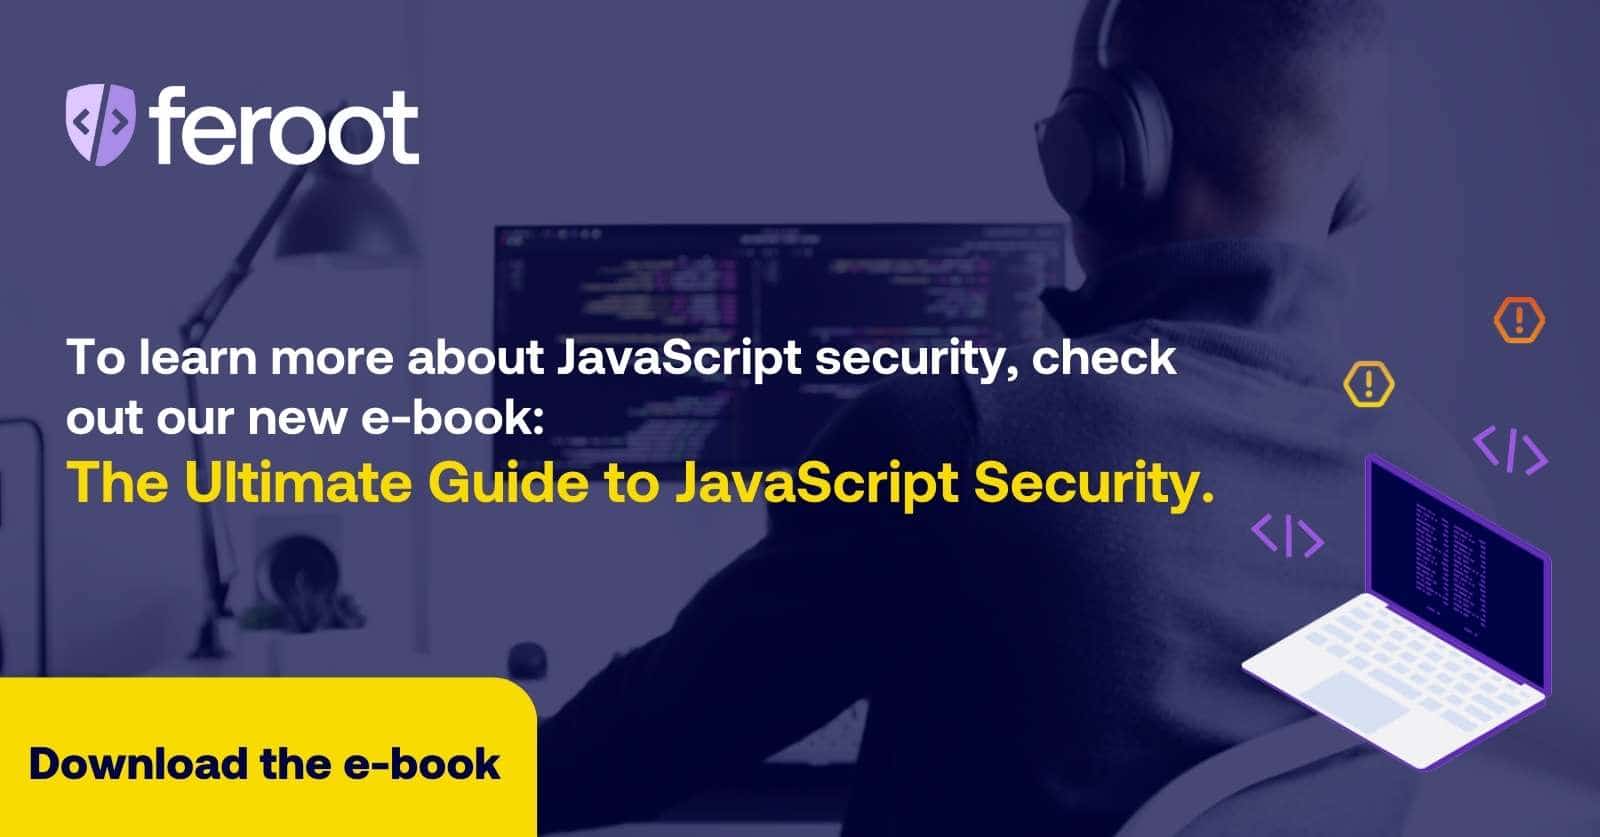 JavaScript Web Application Security: To learn more about JavaScript security, check out our new e-book: The Ultimate Guide to JavaScript Security